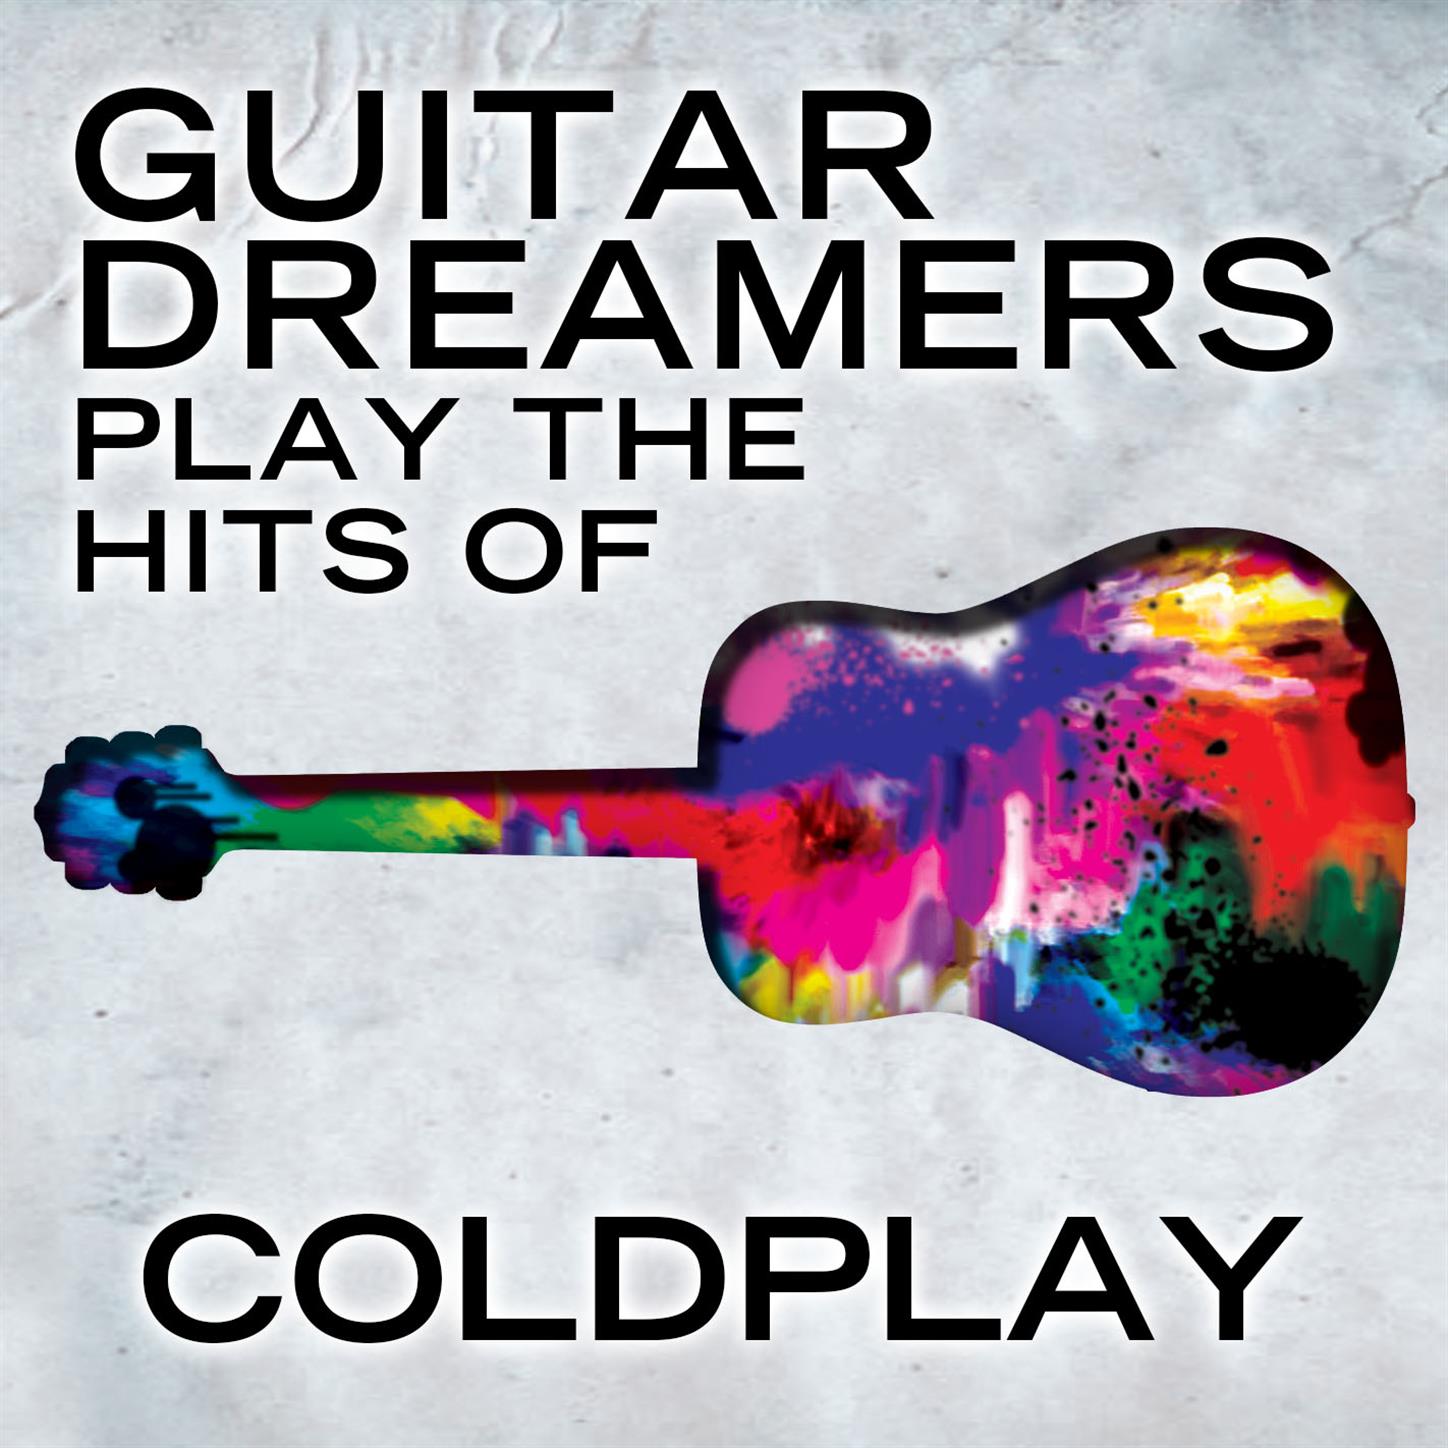 Guitar Dreamers Play the Hits of Coldplay